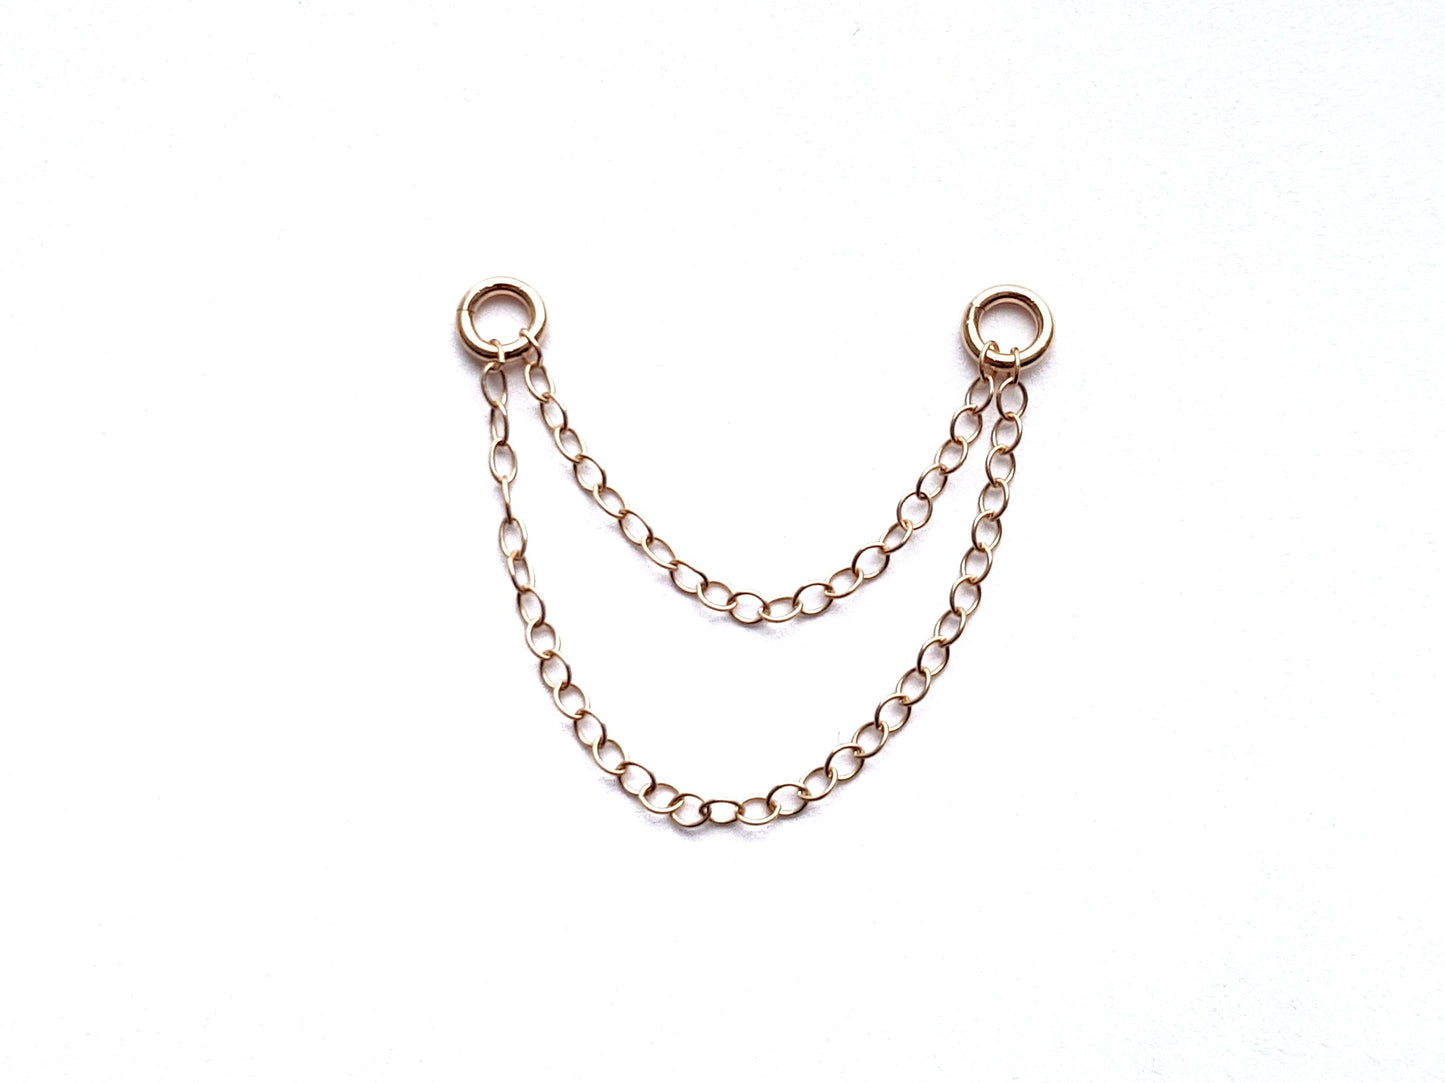 Double Chain for Helix Cartilage Piercing. Barbell Labret or Hoops. 14k Gold Filled